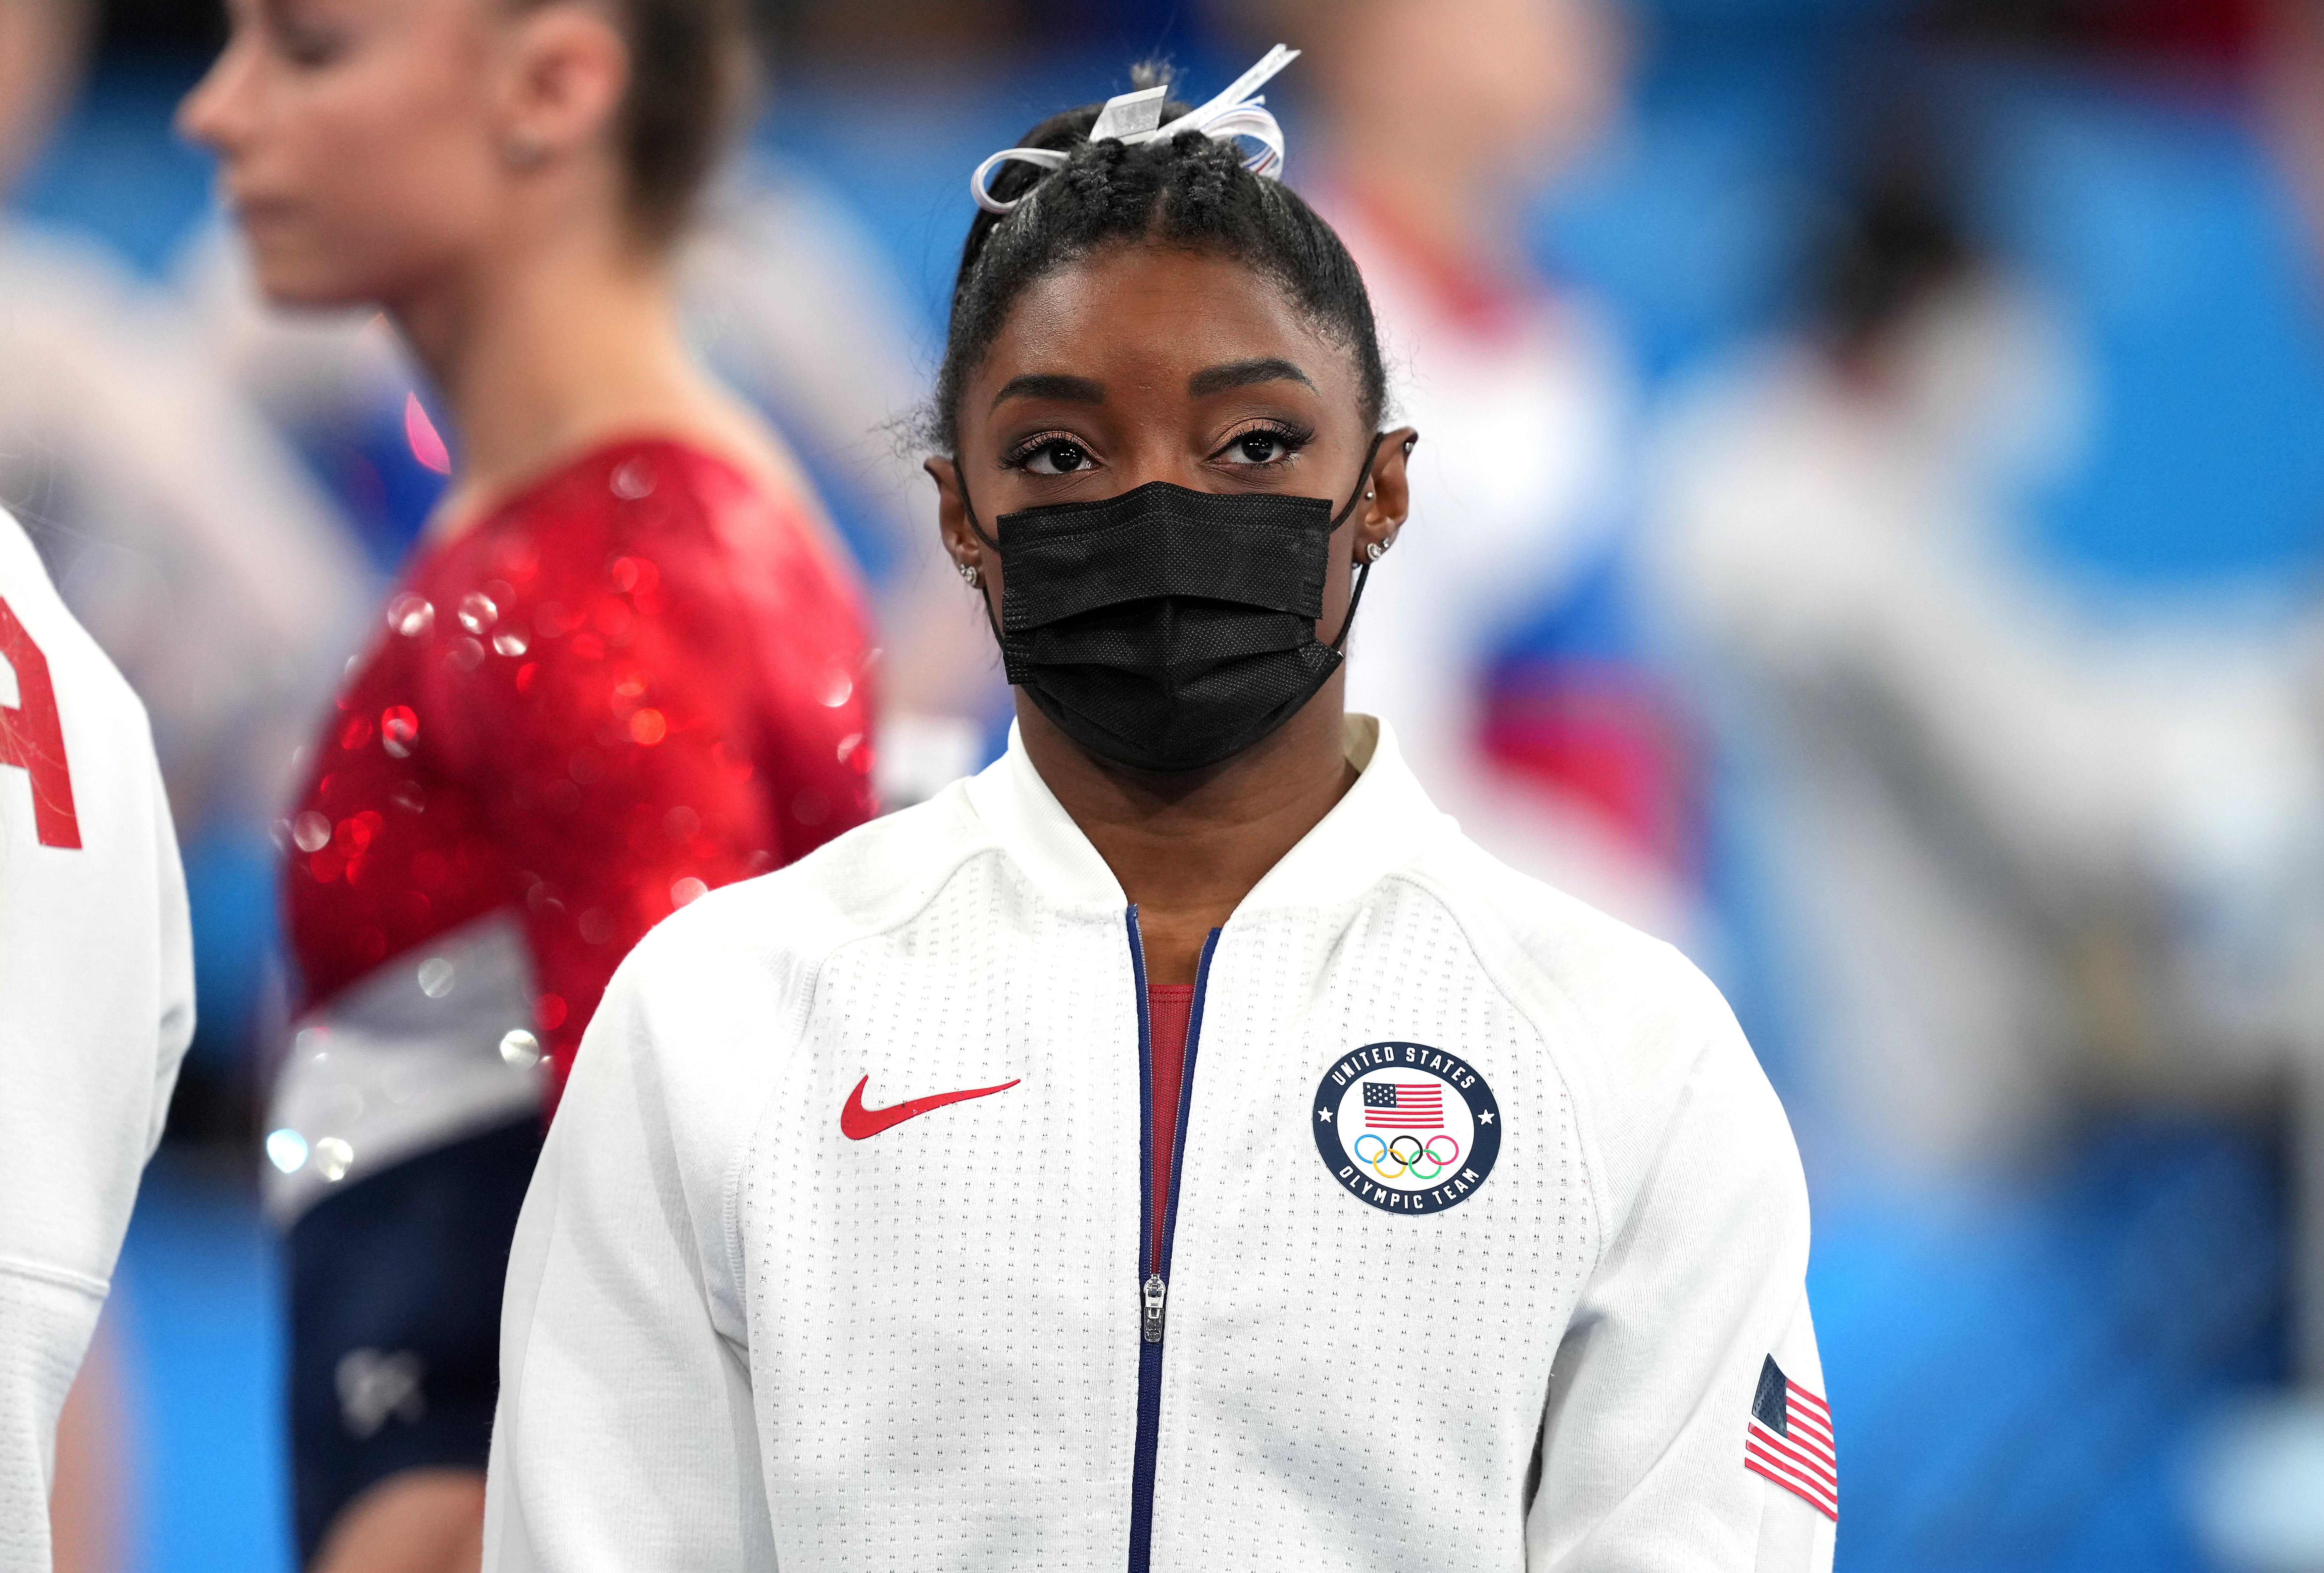 USA’s Simone Biles looks on during the Women’s Team Final after withdrawing through injury. (Martin Rickett/PA)